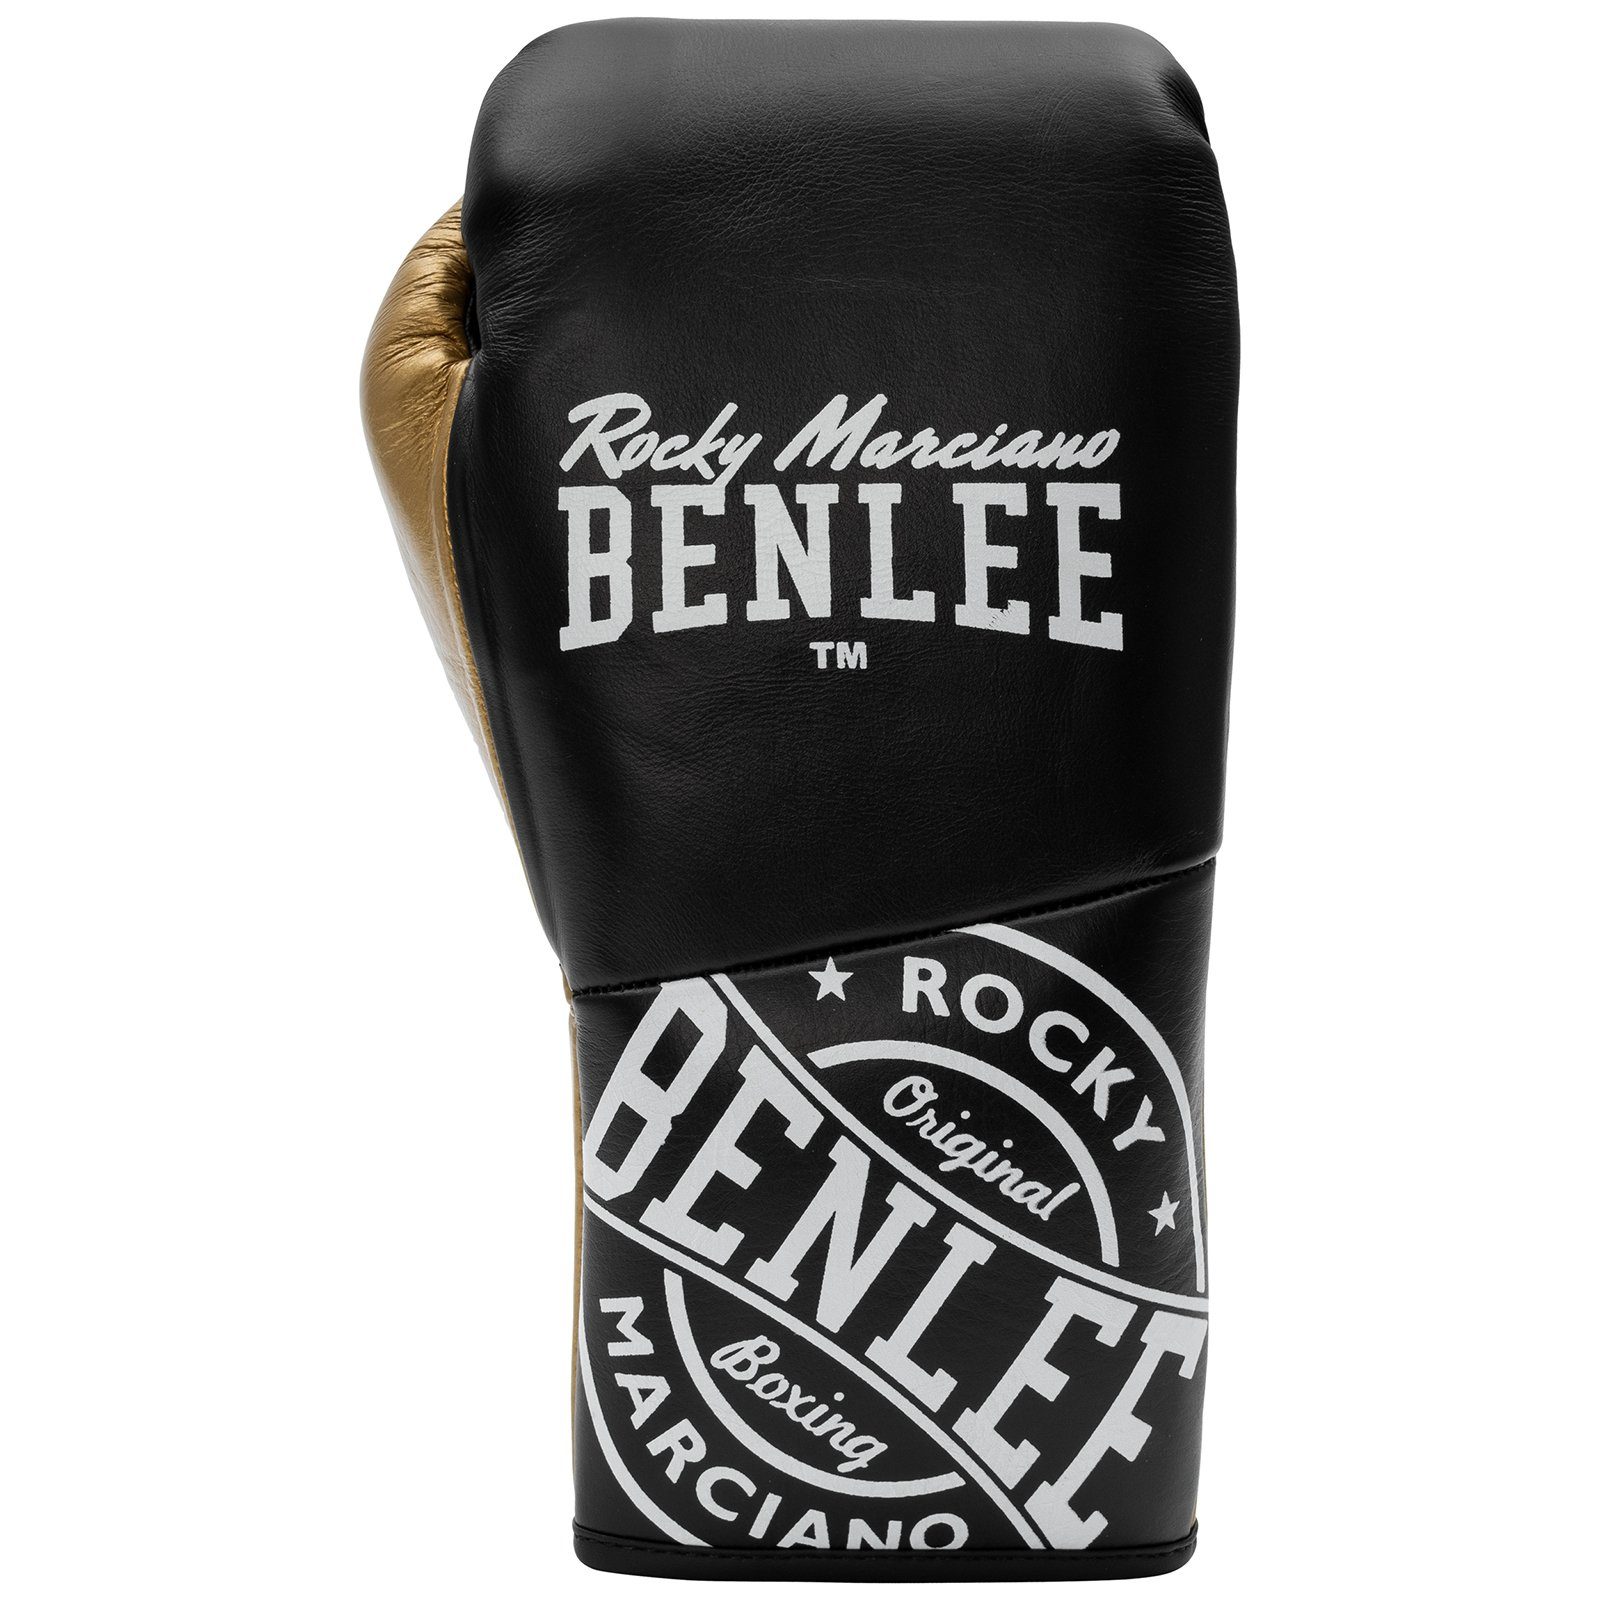 Benlee Rocky Marciano Boxhandschuhe CYCLONE Gold/White/Black